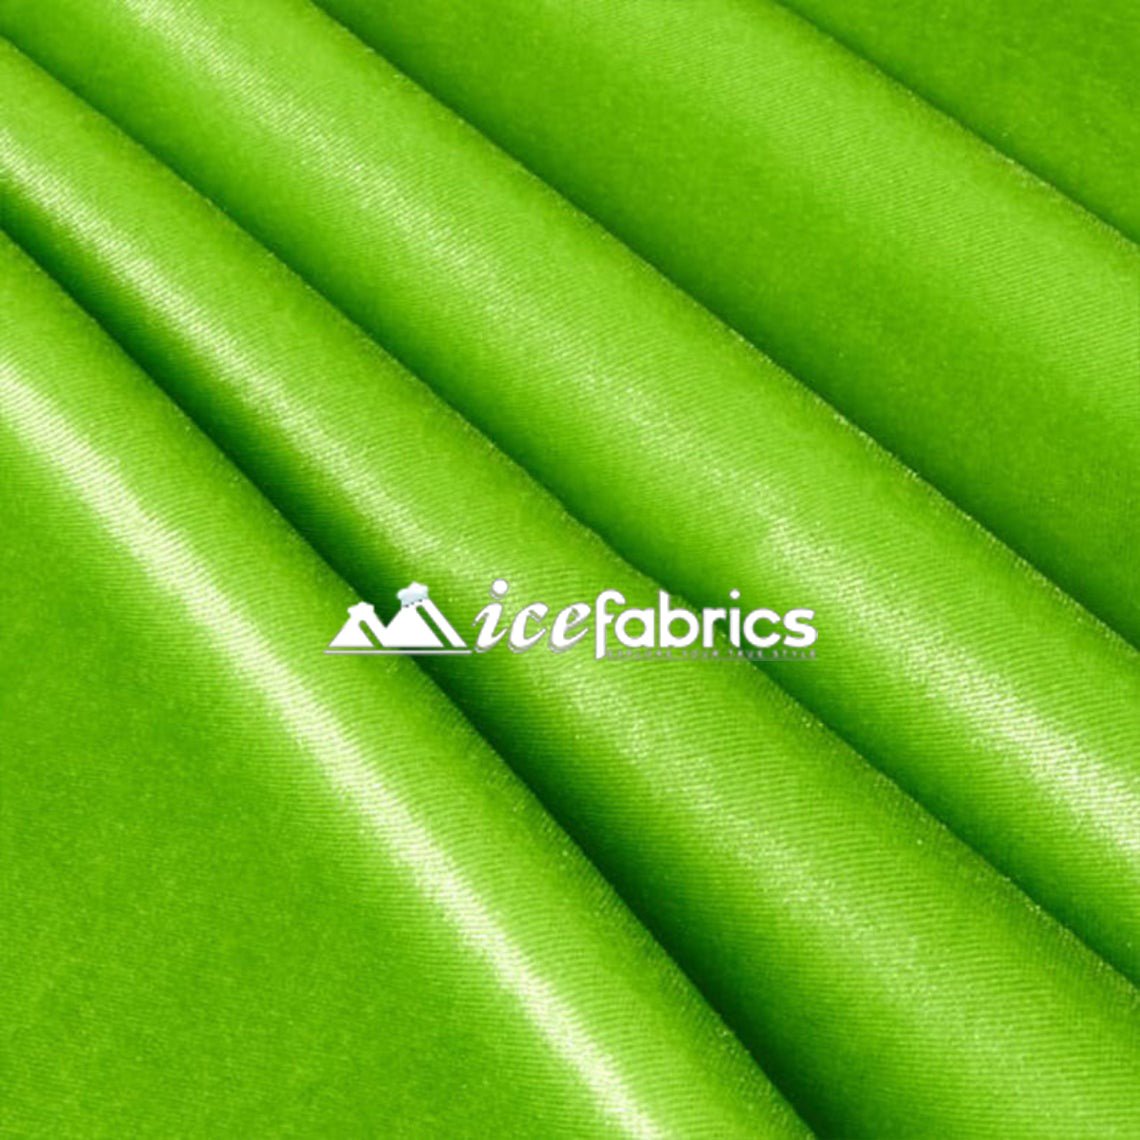 Lime Velvet Fabric By The Yard | 4 Way StretchVelvet FabricICE FABRICSICE FABRICSBy The Yard (58" Wide)Lime Velvet Fabric By The Yard | 4 Way Stretch ICE FABRICS